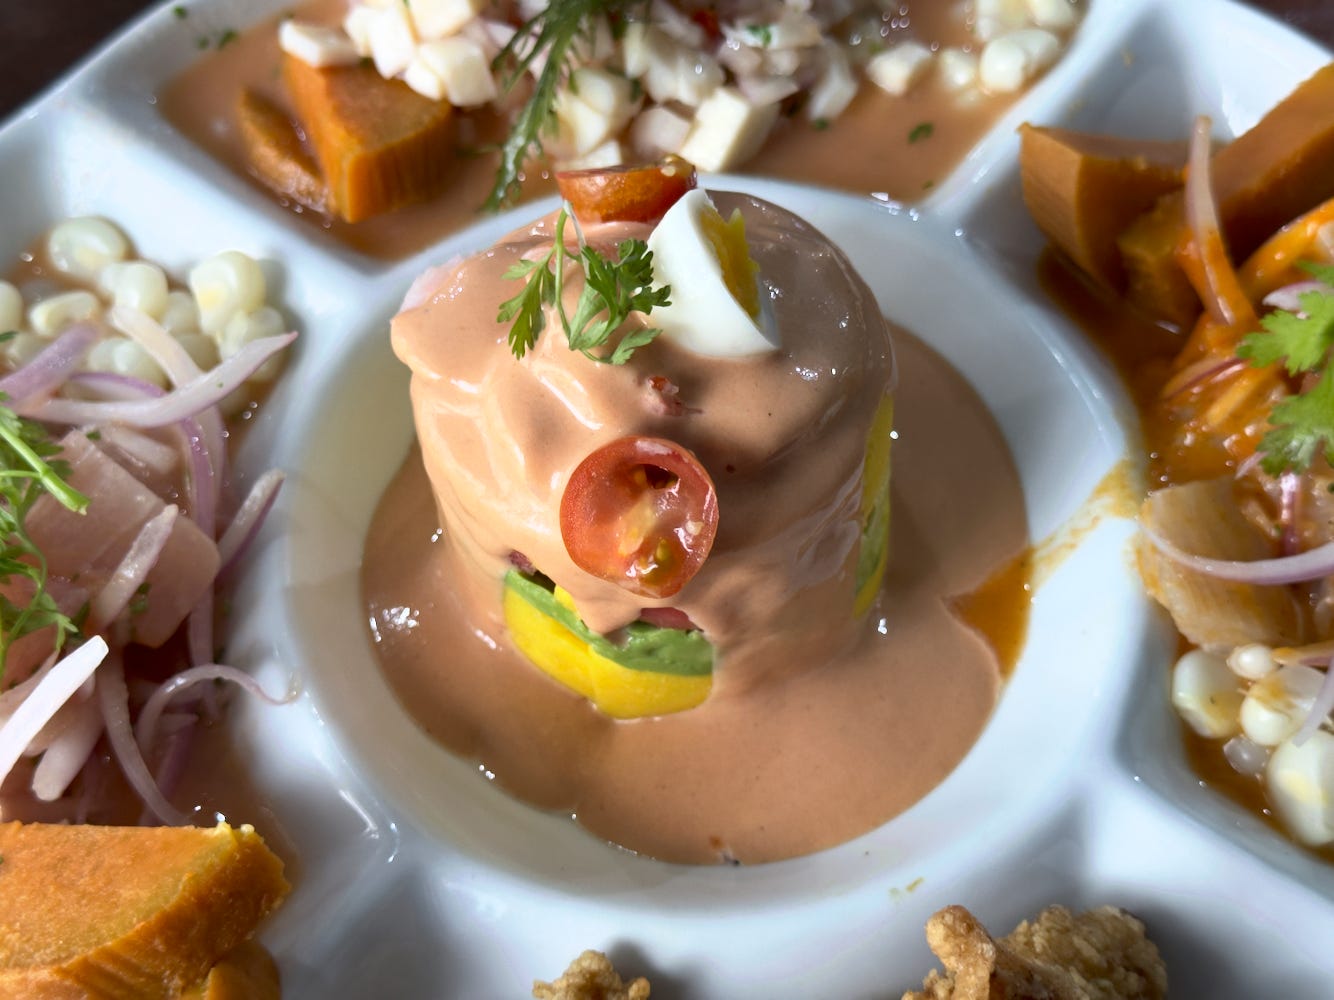 The shrimp salsa at the center of the ronda consists of layers of potato, shrimp, and avocado covered with golf sauce